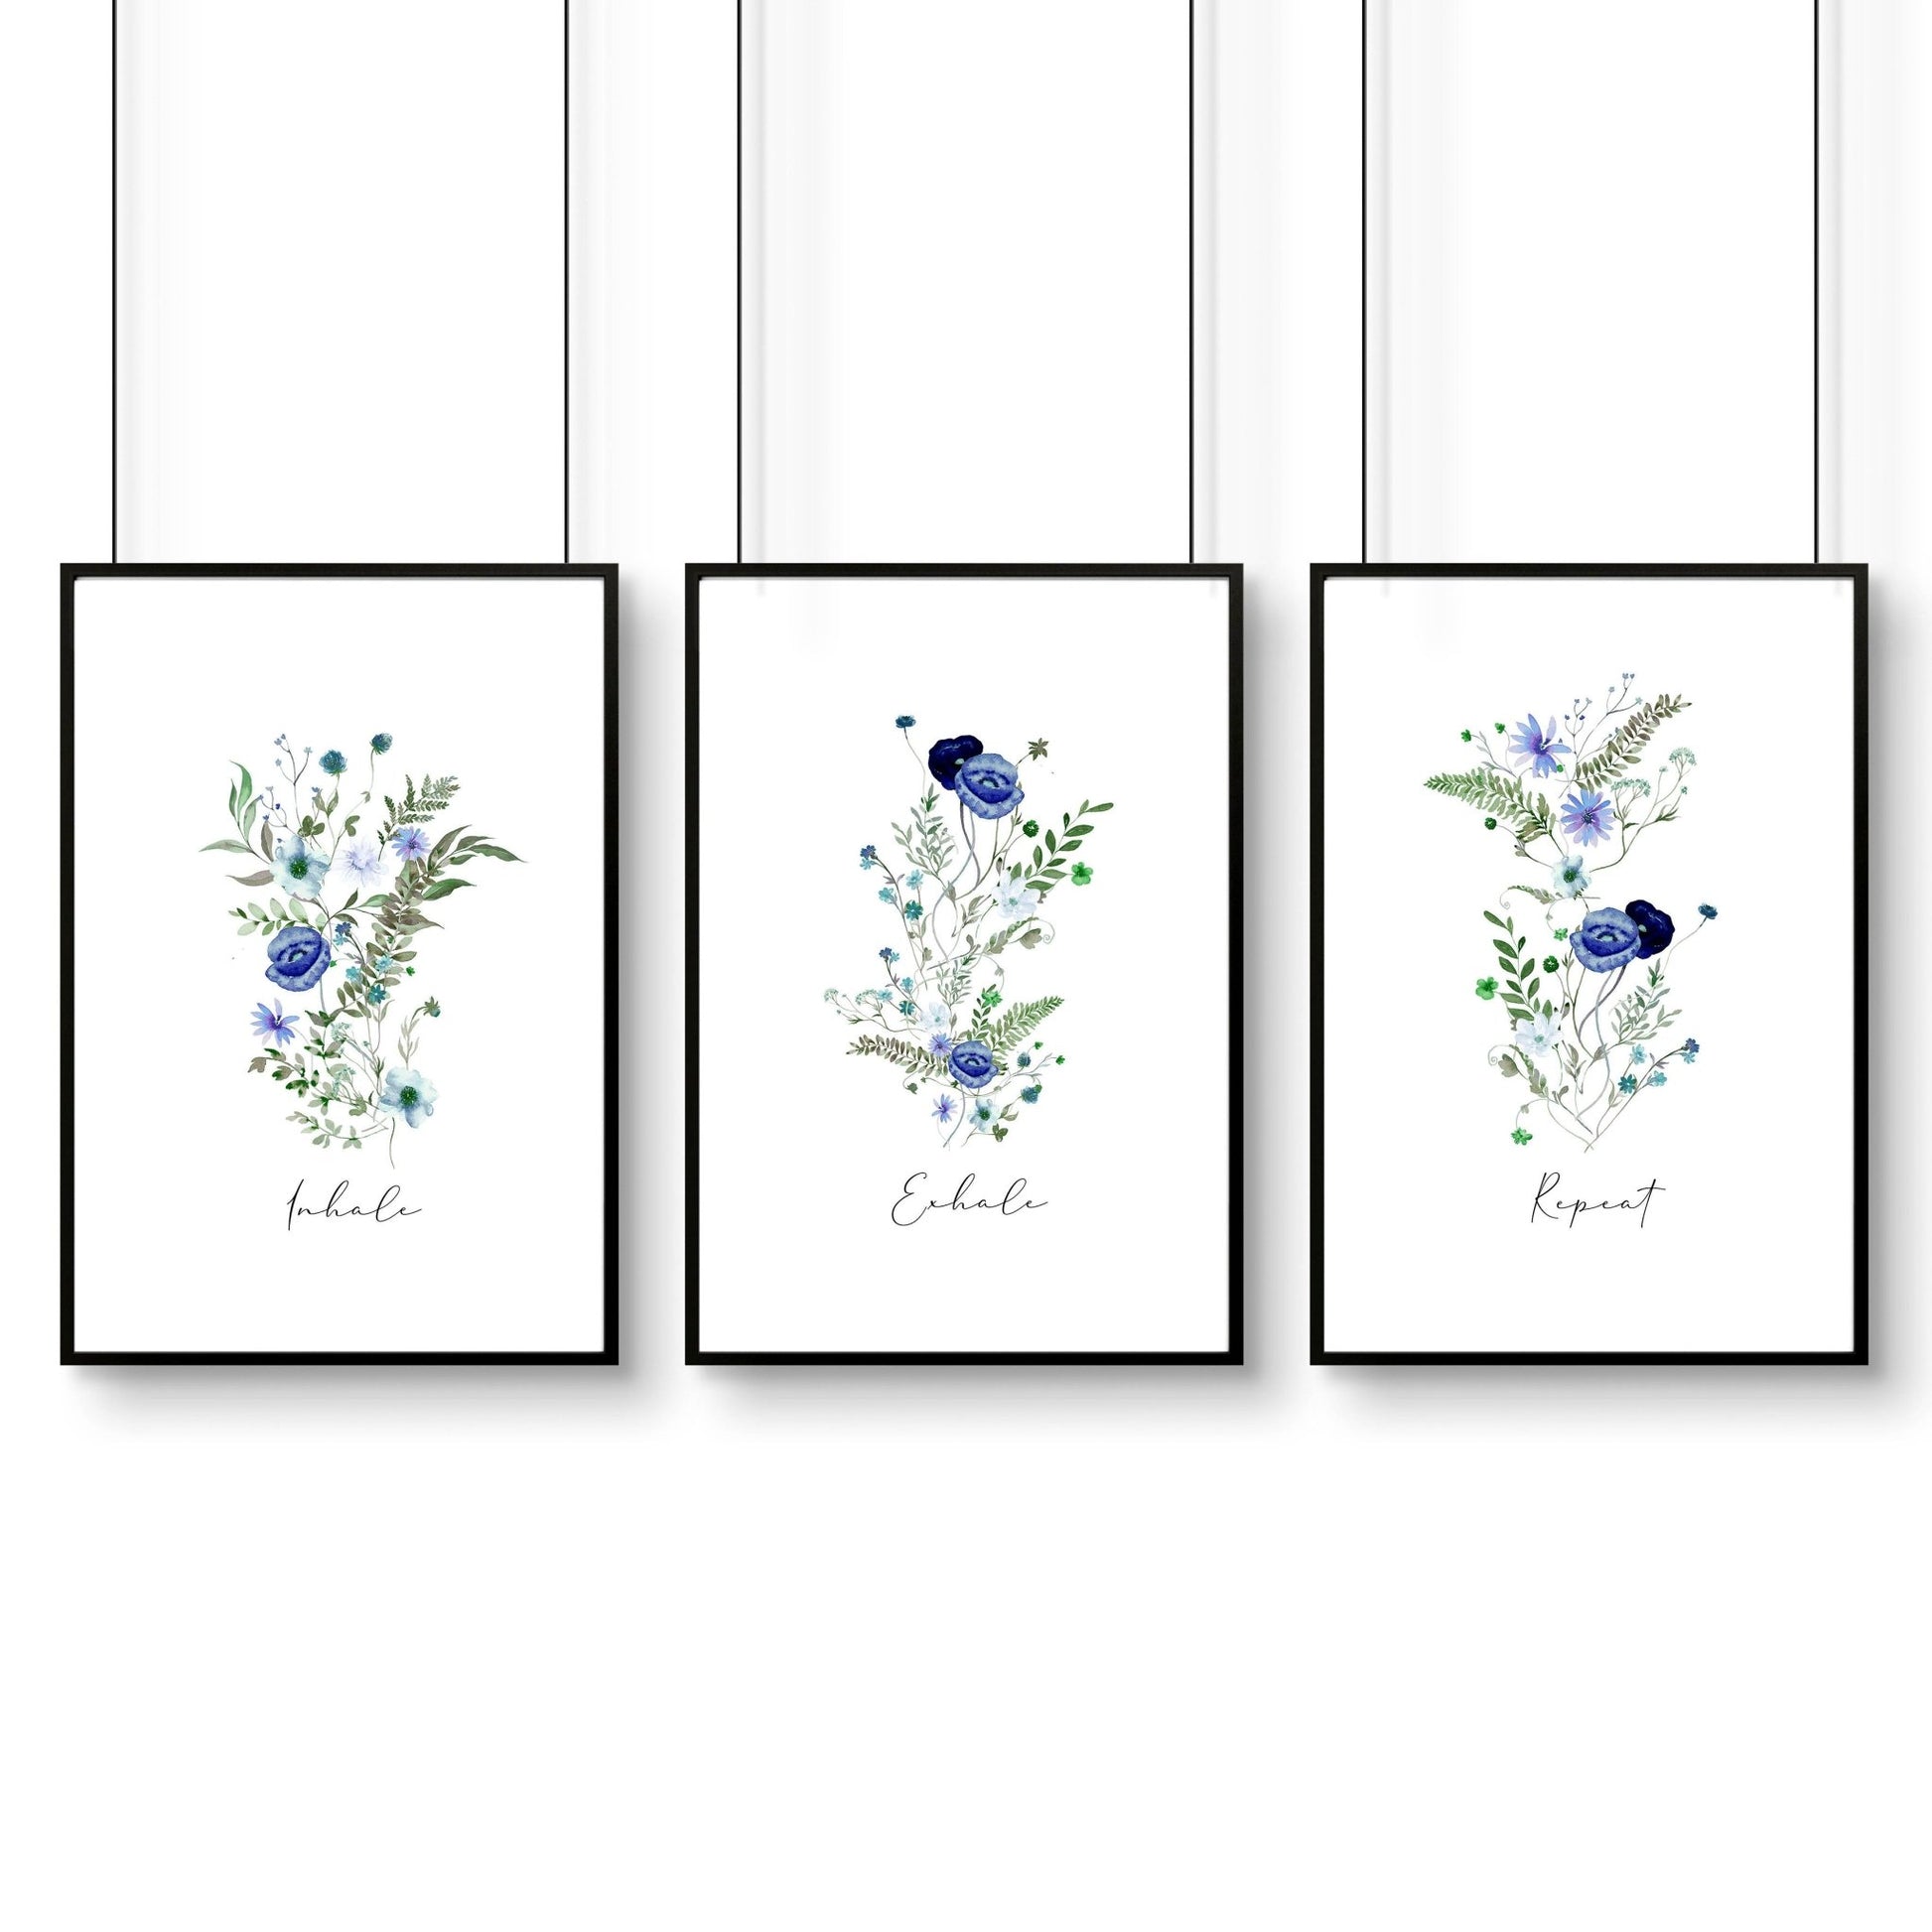 Shabby Chic art for bathroom walls | set of 3 wall art - About Wall Art